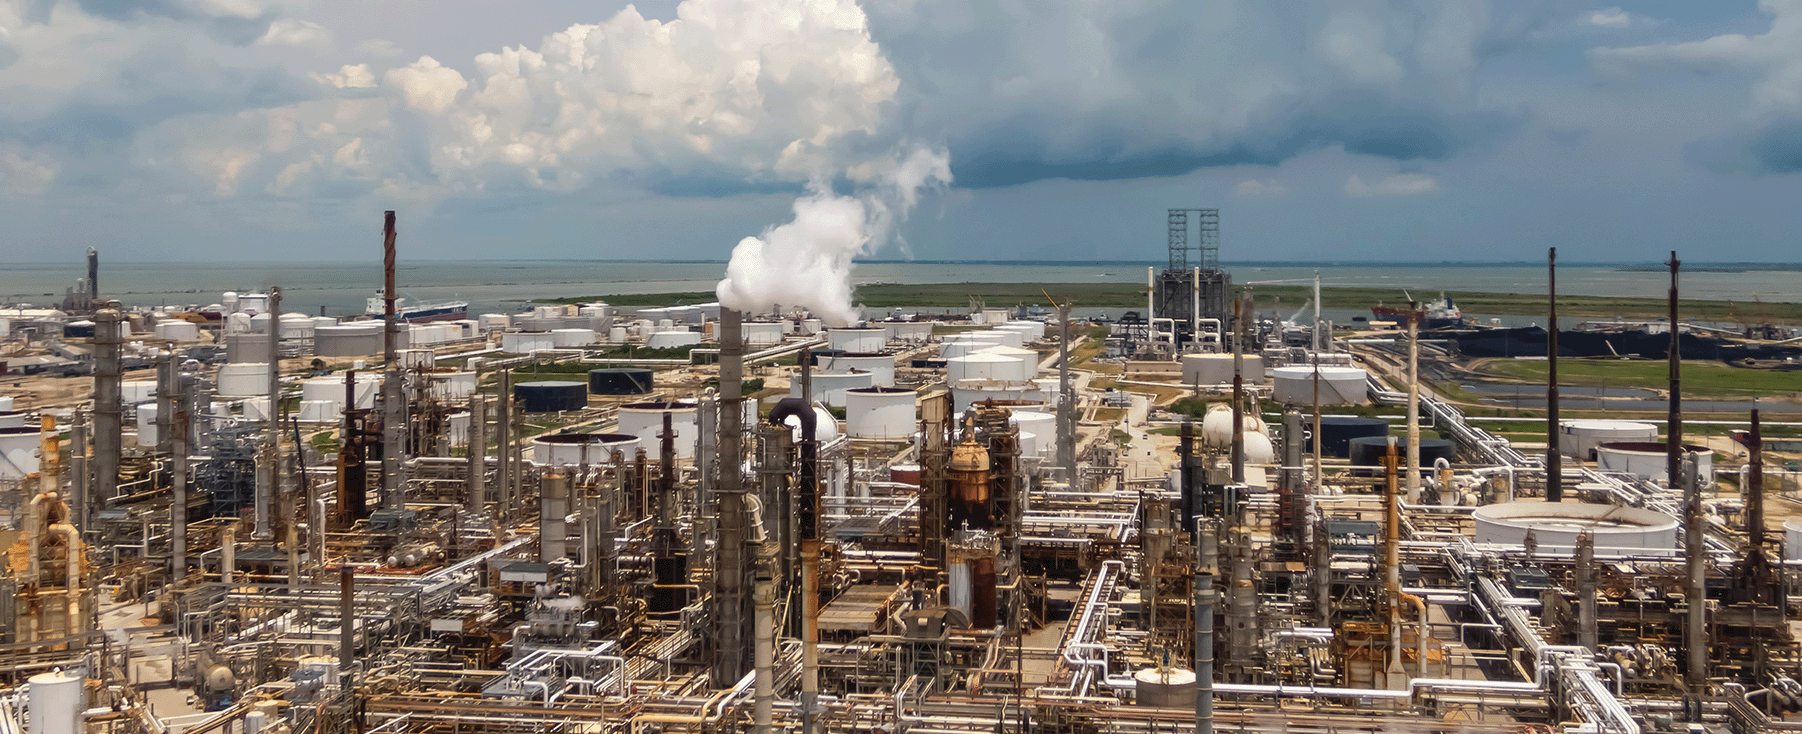 Texas Refinery Site-Specific Monitoring Plan (SSMP)